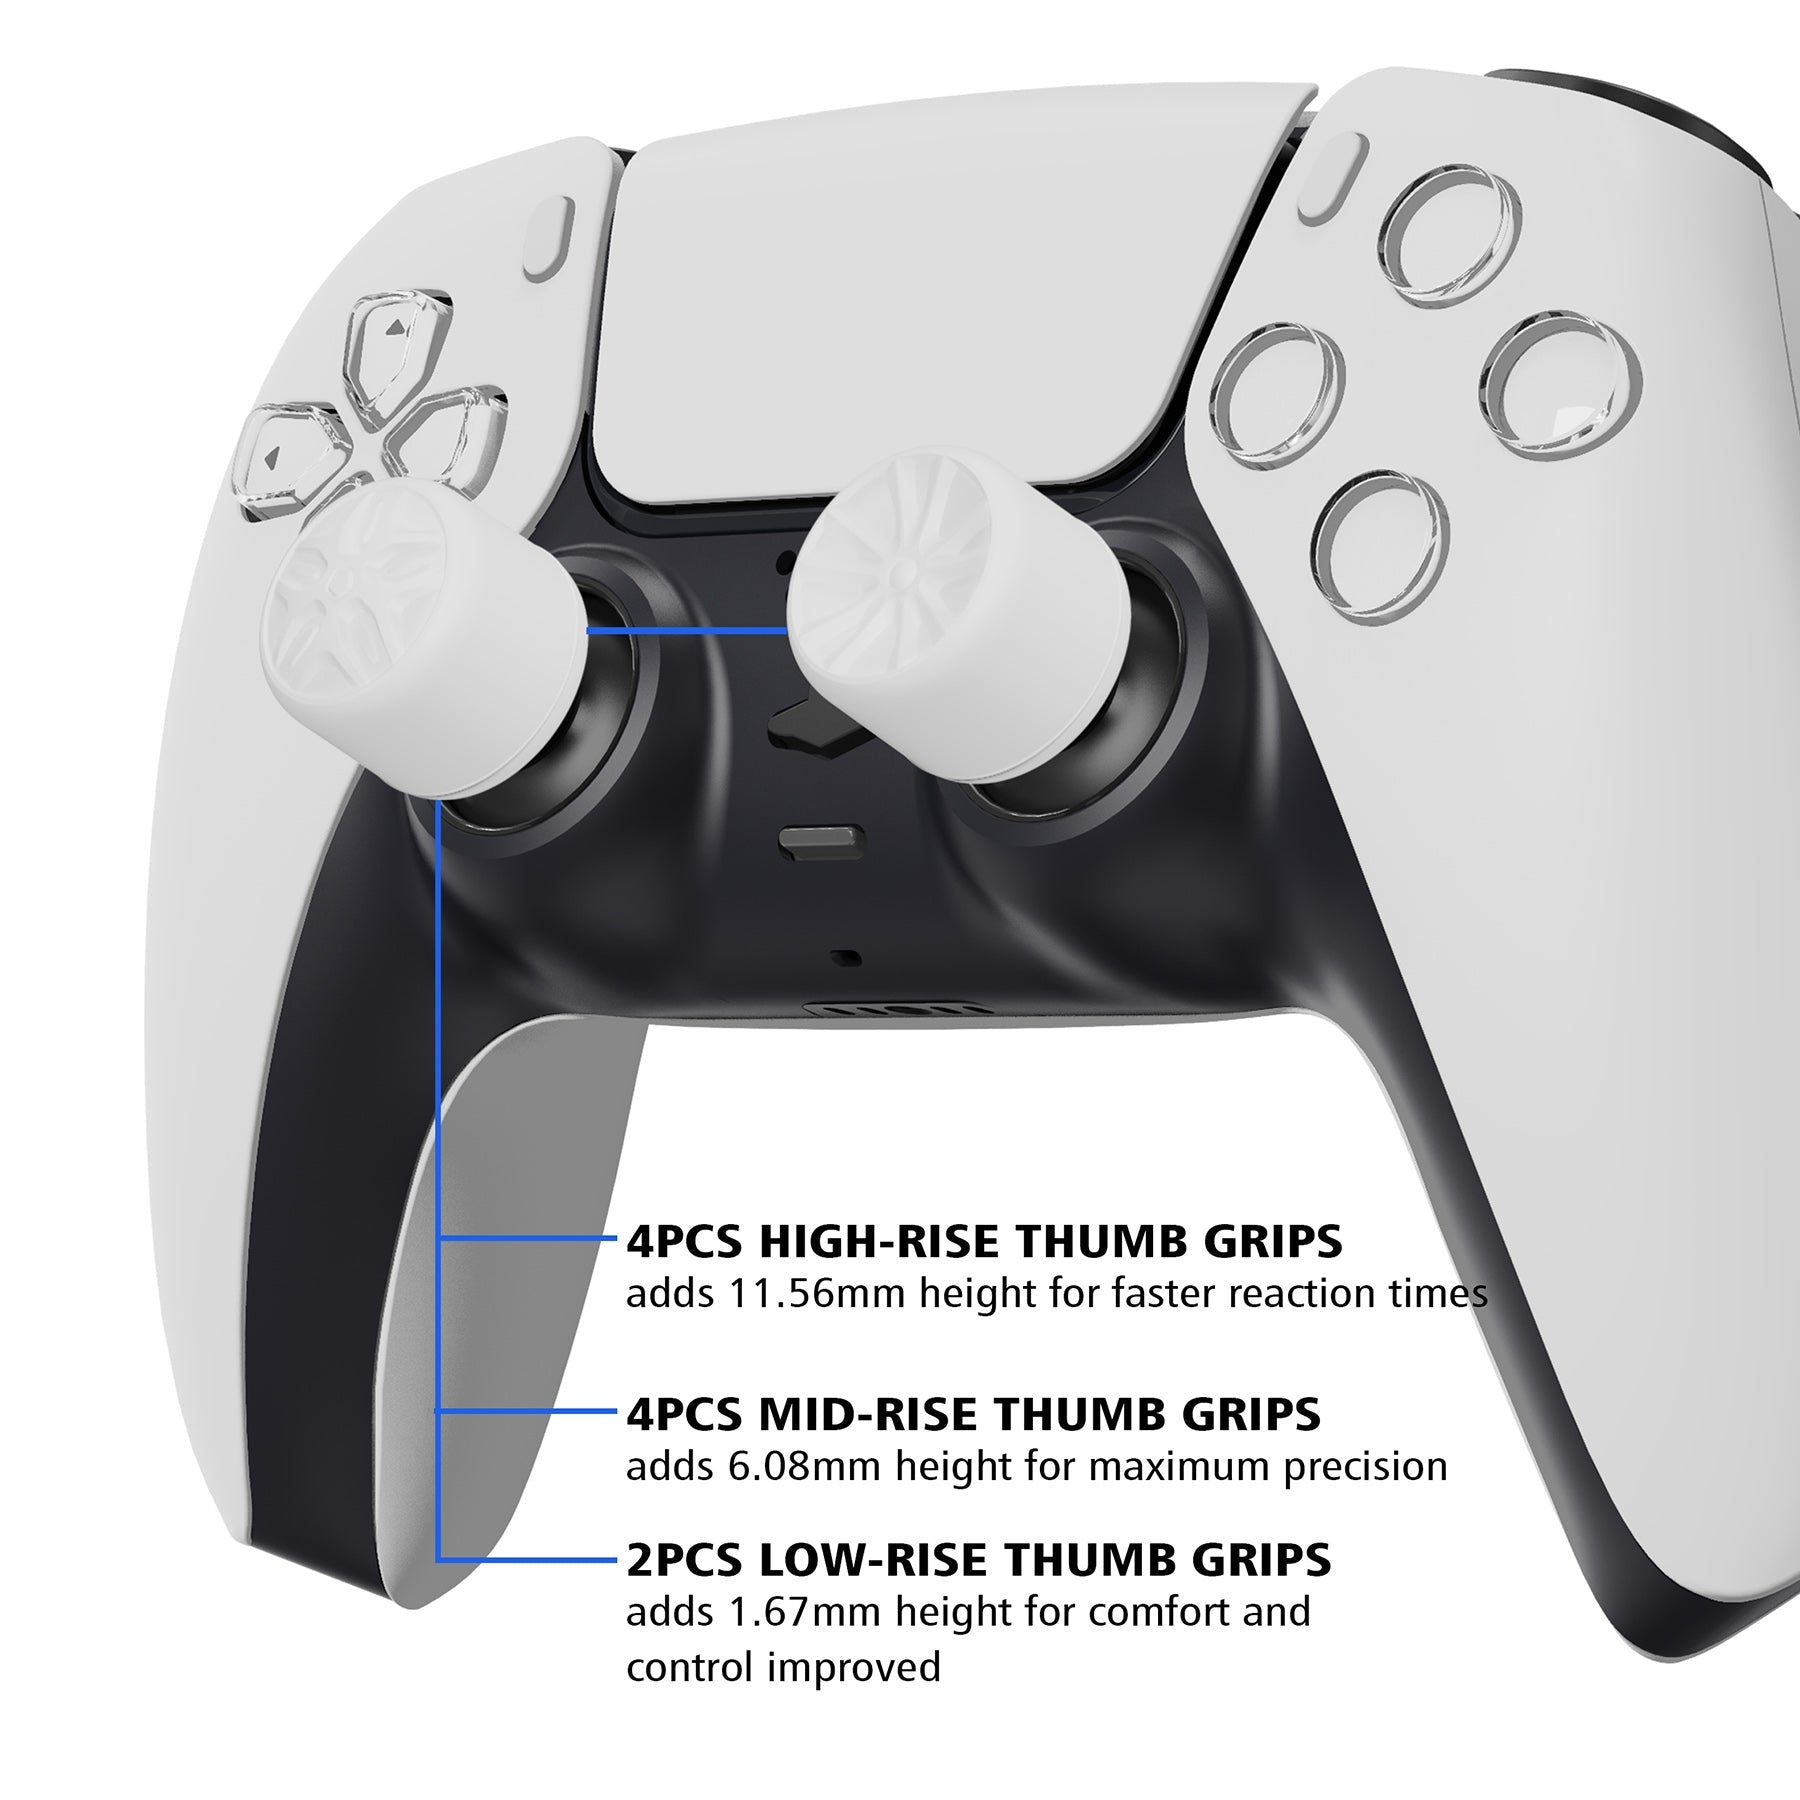 PlayVital White Ergonomic Analog Joystick Caps for Xbox Series X/S, Xbox One, Xbox One X/S, PS5, PS4, Switch Pro Controller - with 3 Height Convex and Concave - Pentagram & Rotary Wheels Design - PJM2018 PlayVital